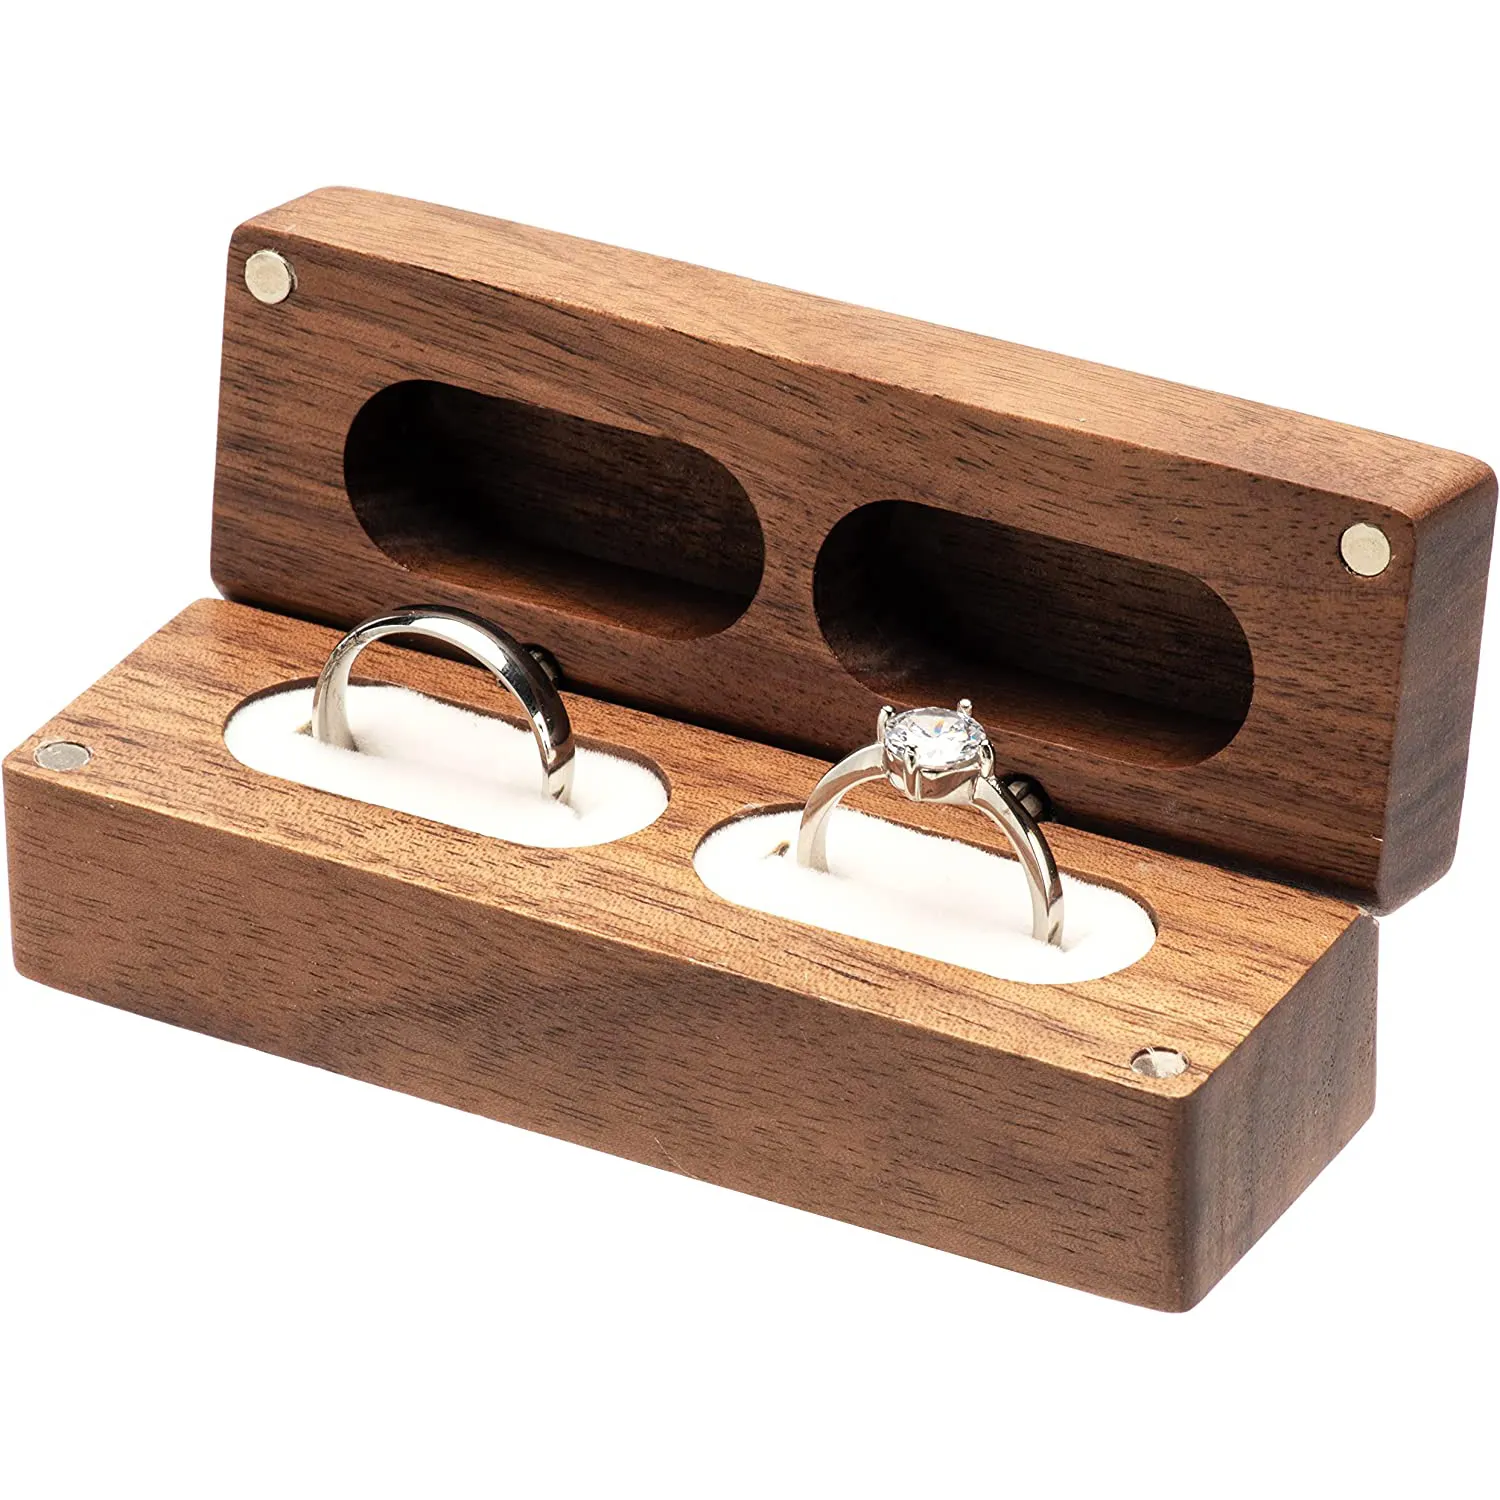 Wooden Double Ring Bearing Box for Wedding Ceremony Engagement,Ring Storage Rack Decorative Box for 2 Rings